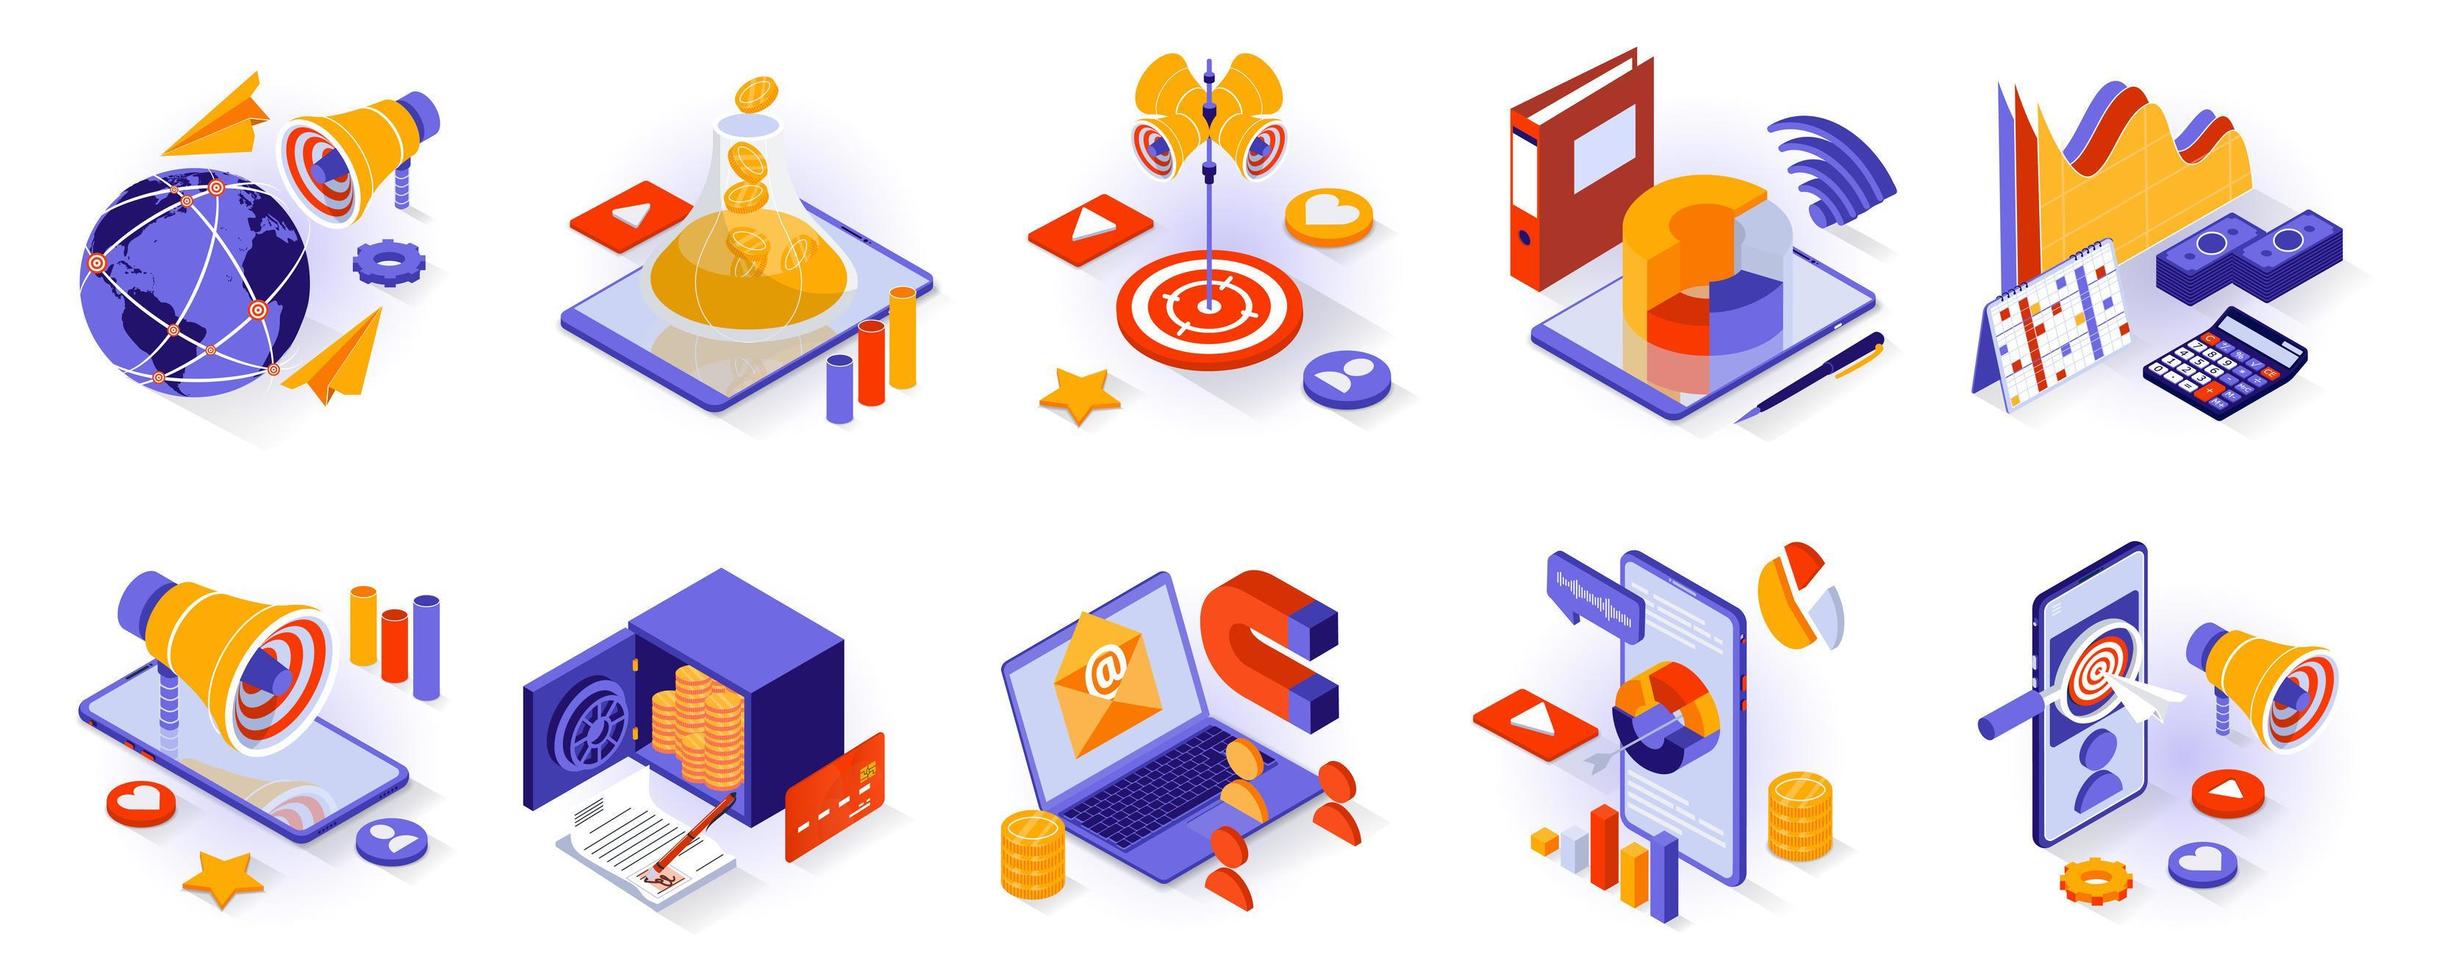 Business and marketing concept isometric 3d icons set. Global promotion, sales funnel and profit growth, data analytics, banking, online advertising isometry isolated collection. Vector illustration